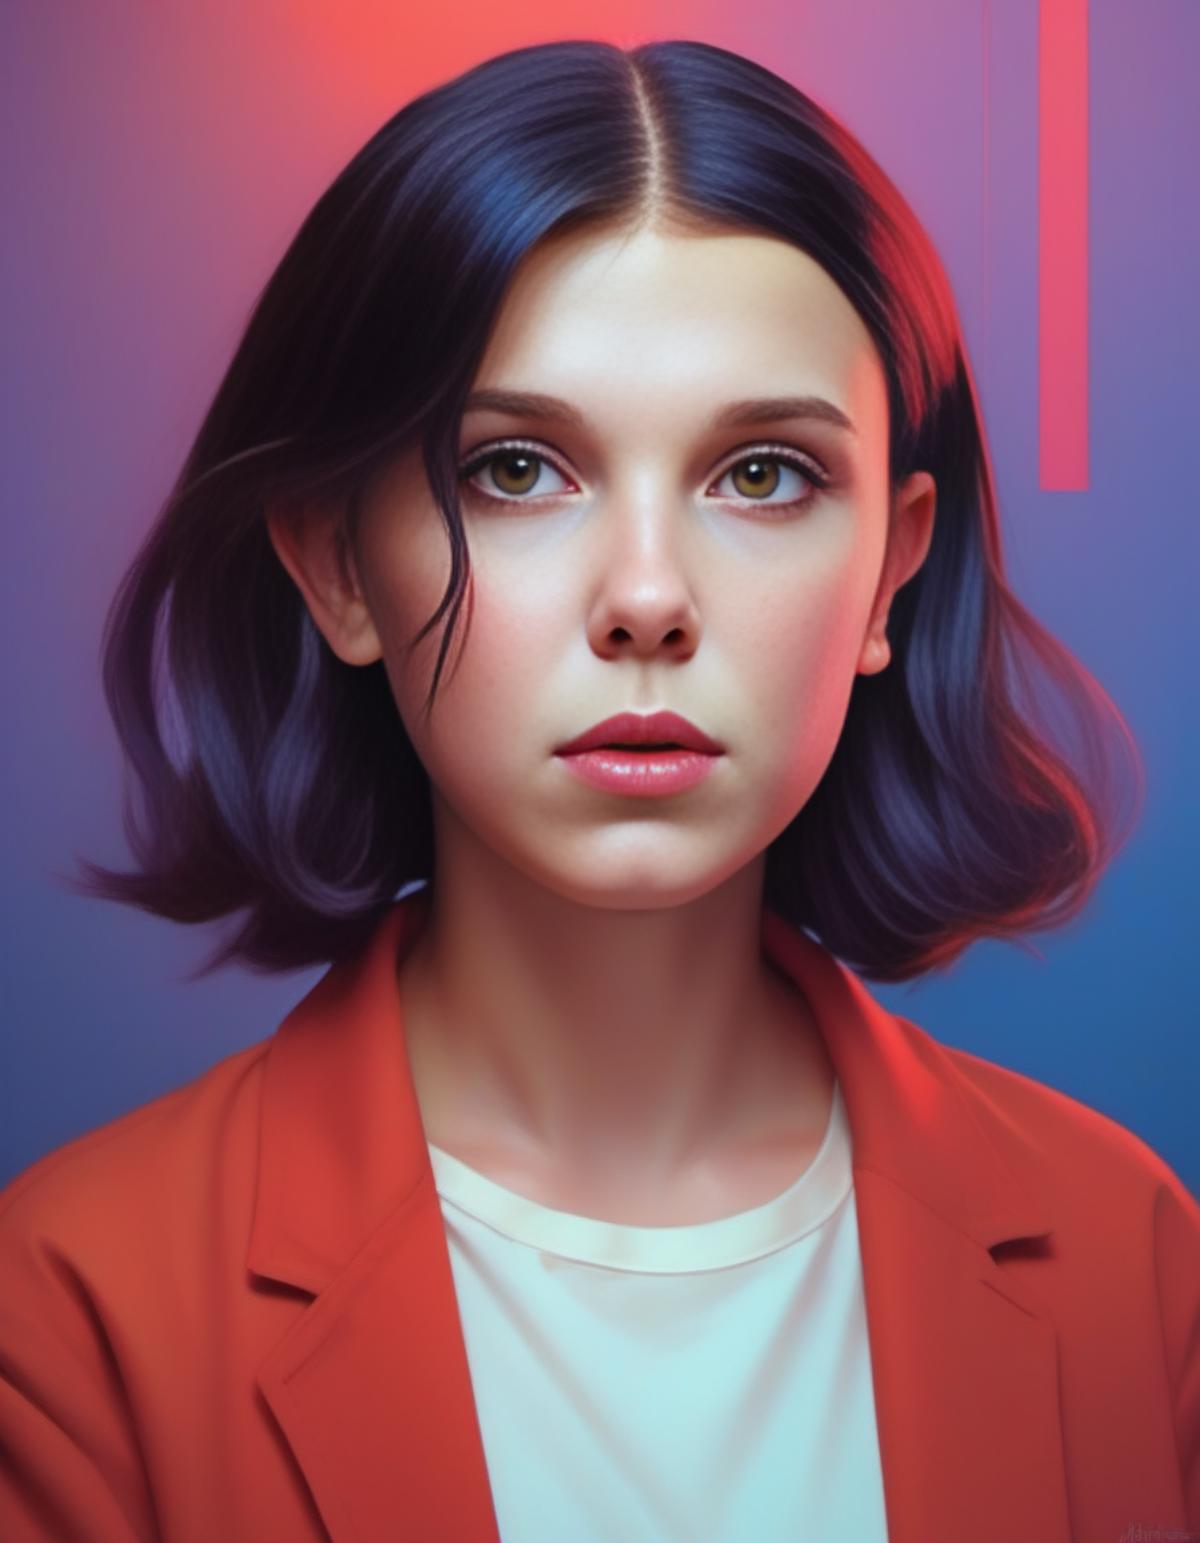 Millie Bobby Brown image by parar20